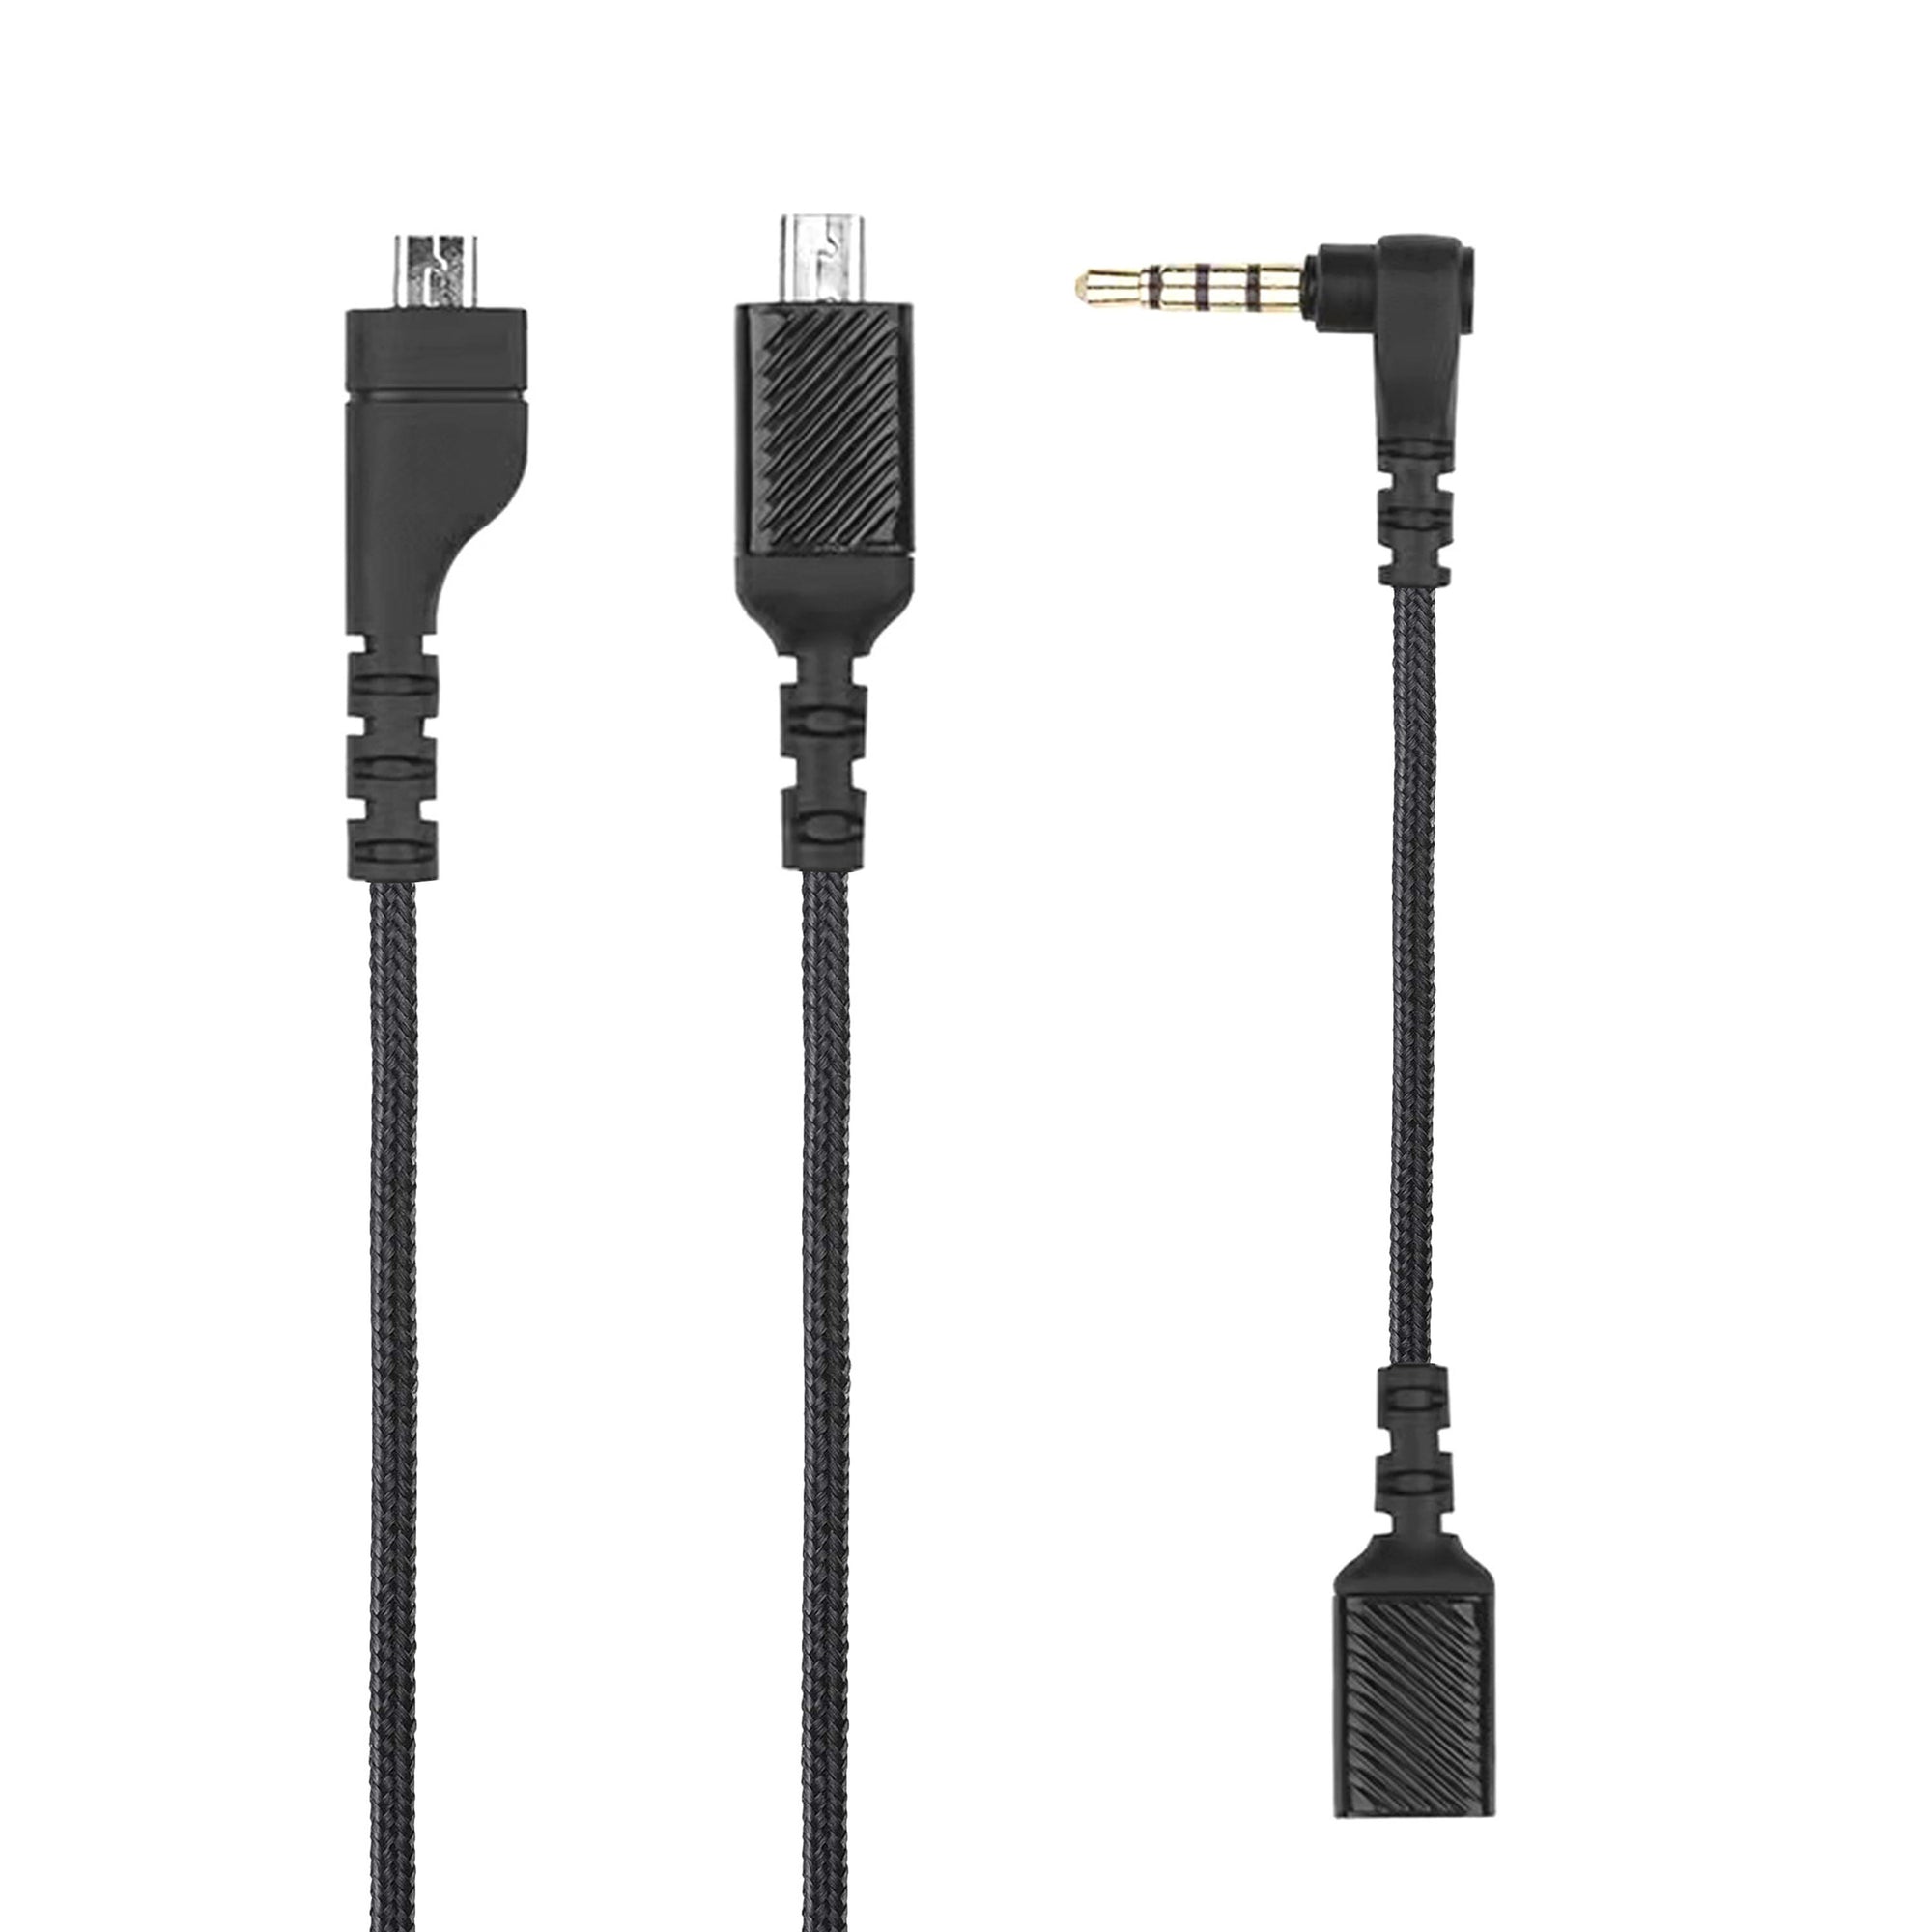 Replacement Audio Cable for STEELSERIES ARCTIS 3, 5, 7 & Arctis Pro, Arctis Pro Wireless & GameDac Gaming Headsets - 1.8M / 70”